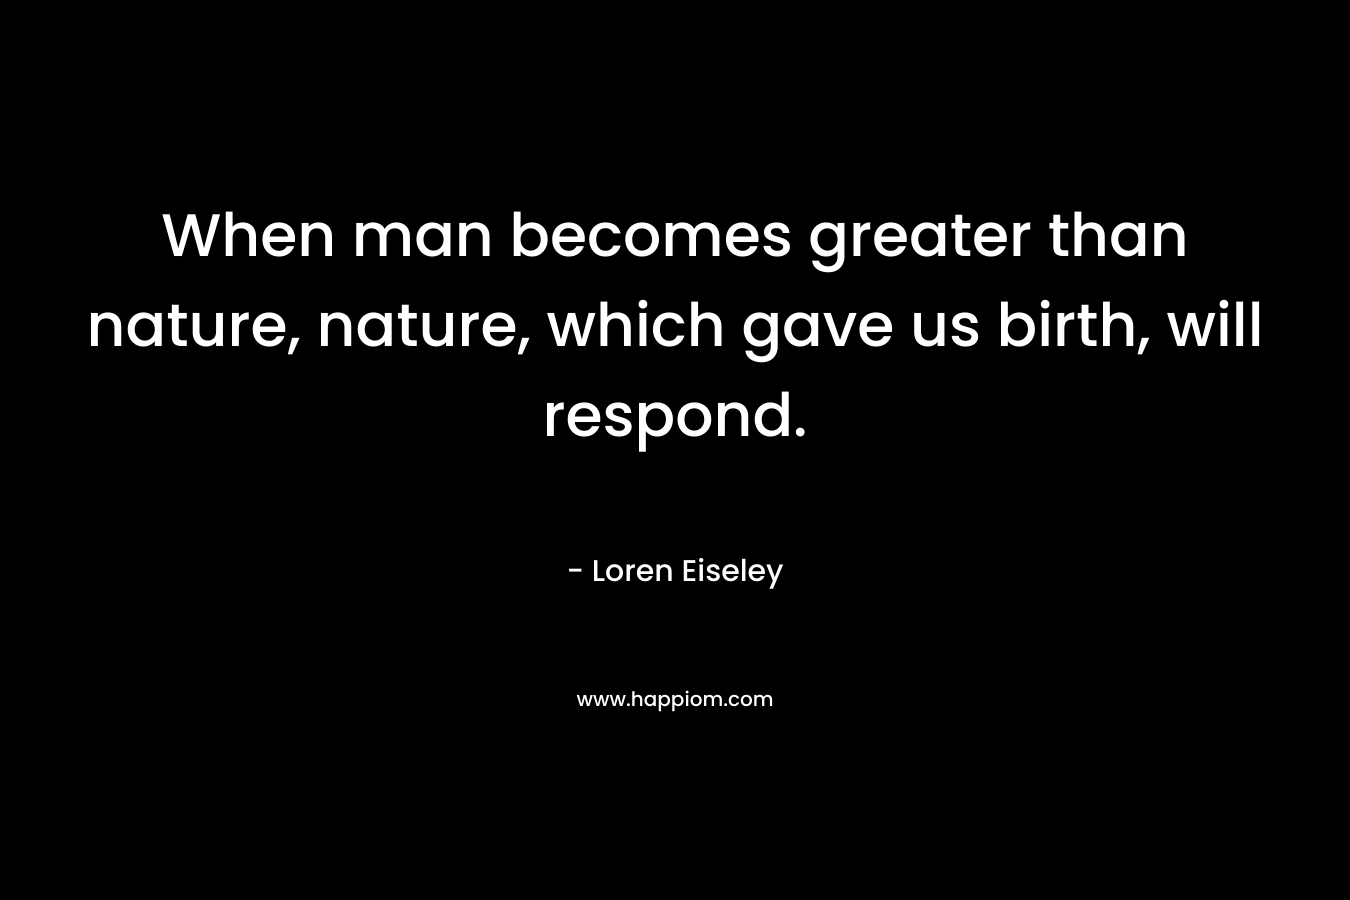 When man becomes greater than nature, nature, which gave us birth, will respond.